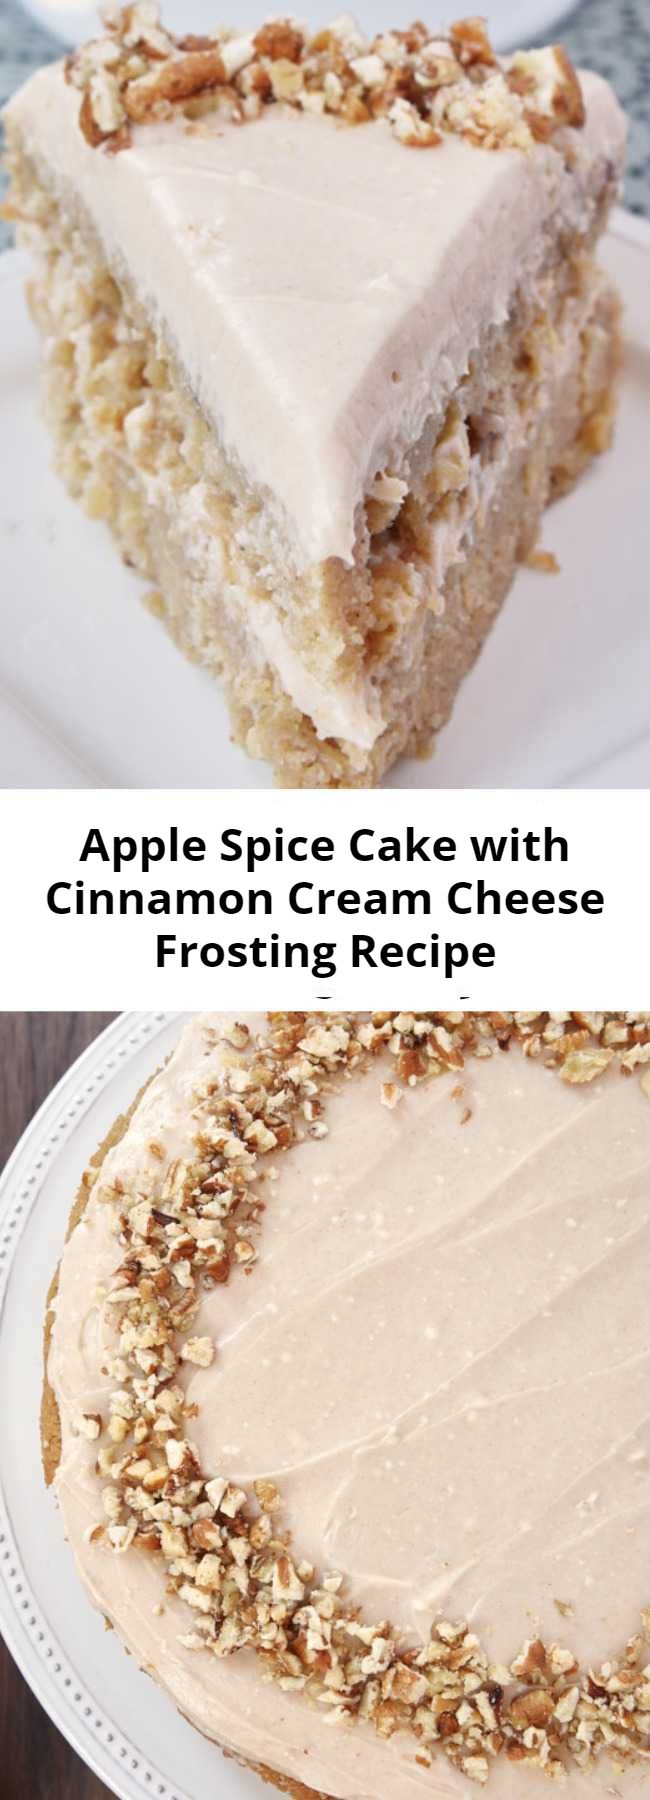 Apple Spice Cake with Cinnamon Cream Cheese Frosting Recipe - Apple Spice Cake with Cinnamon Cream Cheese Frosting is a delicious celebration of all things fall with lots of apples and fall spices.